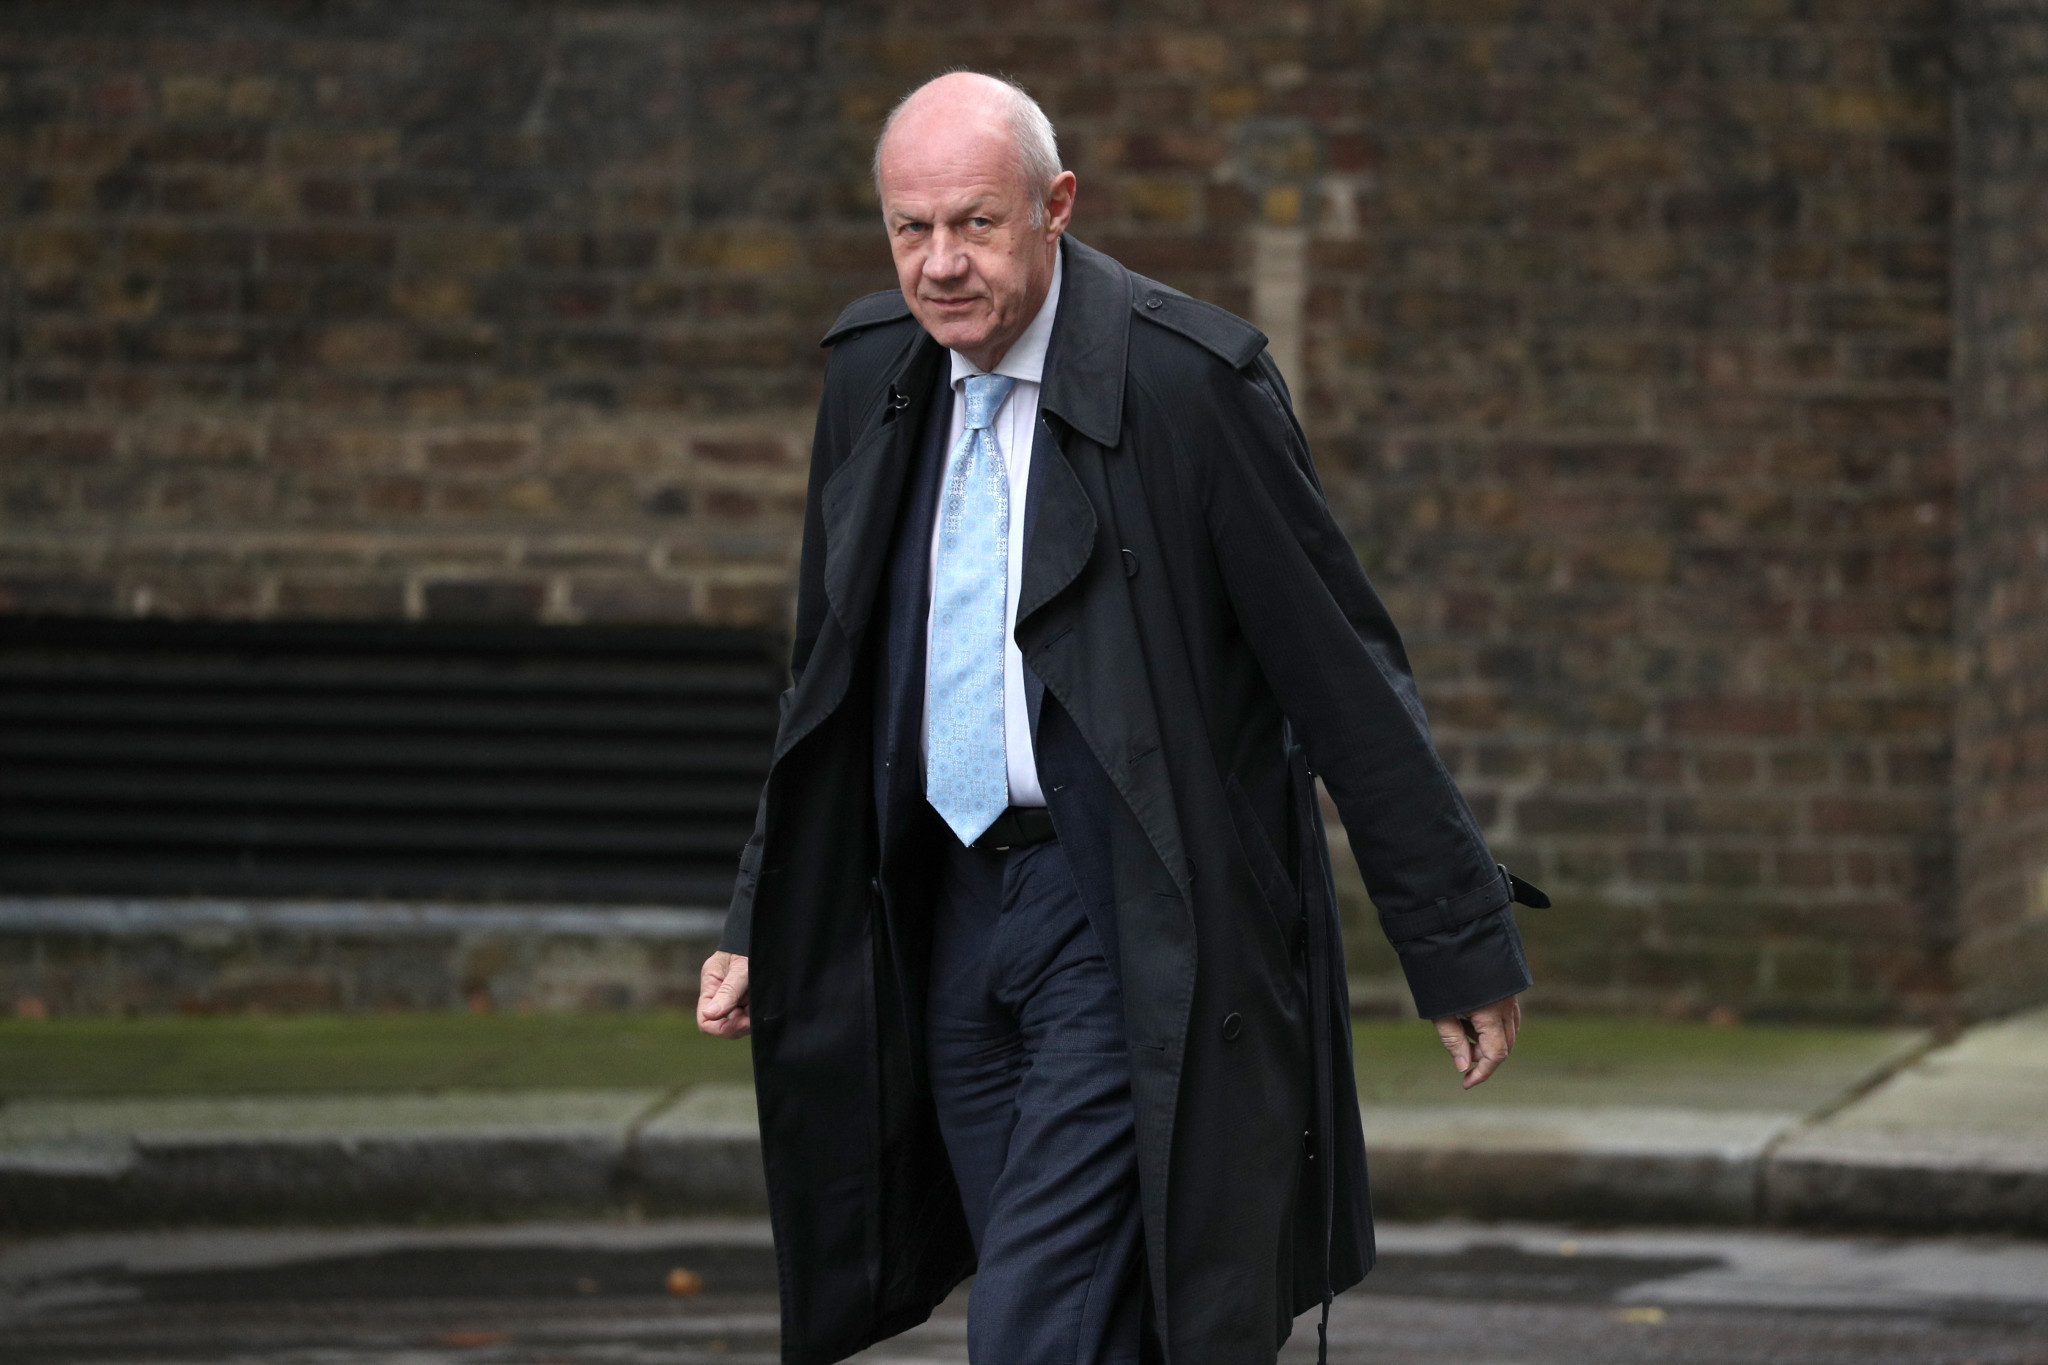 British Conservative Member of Parliament Damian Green questioned the conflict of interest facing the ECB, thus raising questions about the need for independent panels to review governing bodies' decisions ©Getty Images